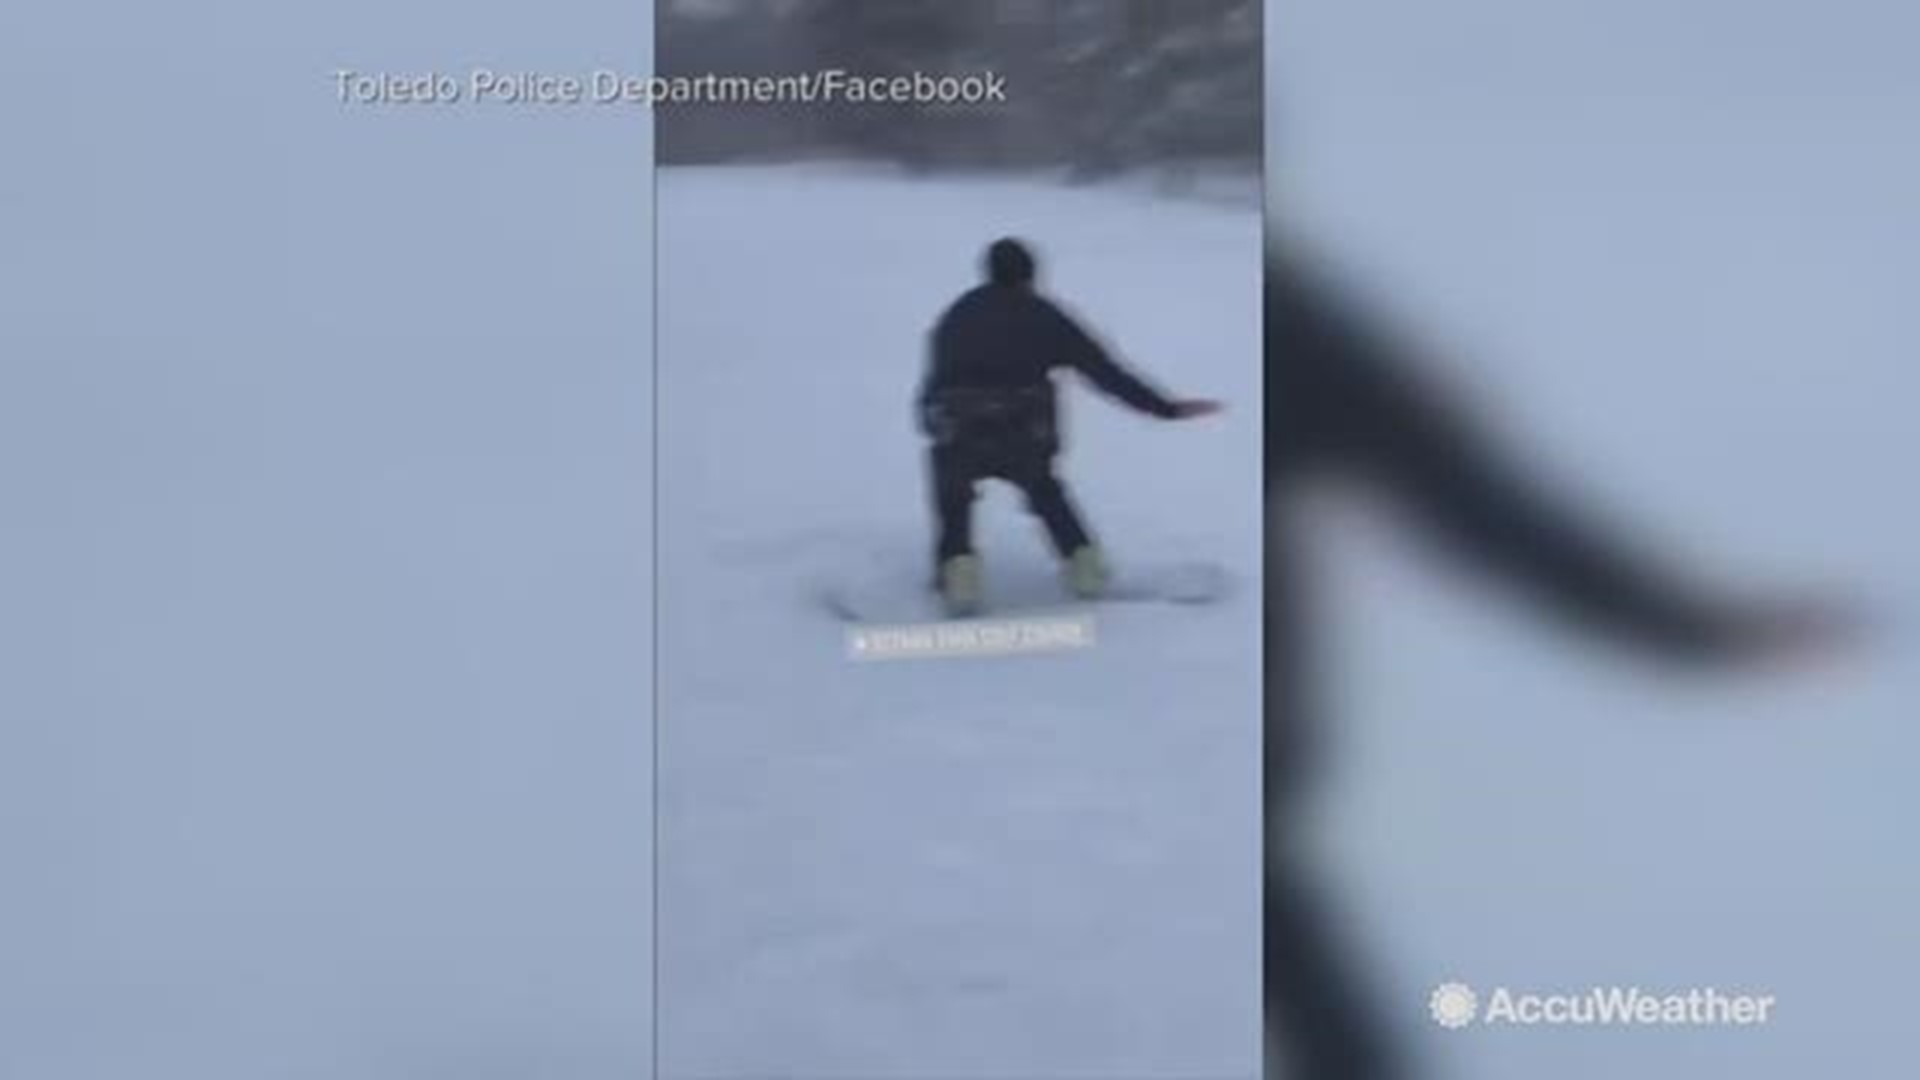 Sledding is a great way to have fun with a group of people, and that's just what this police officer from Toledo, Ohio did on Jan. 19.